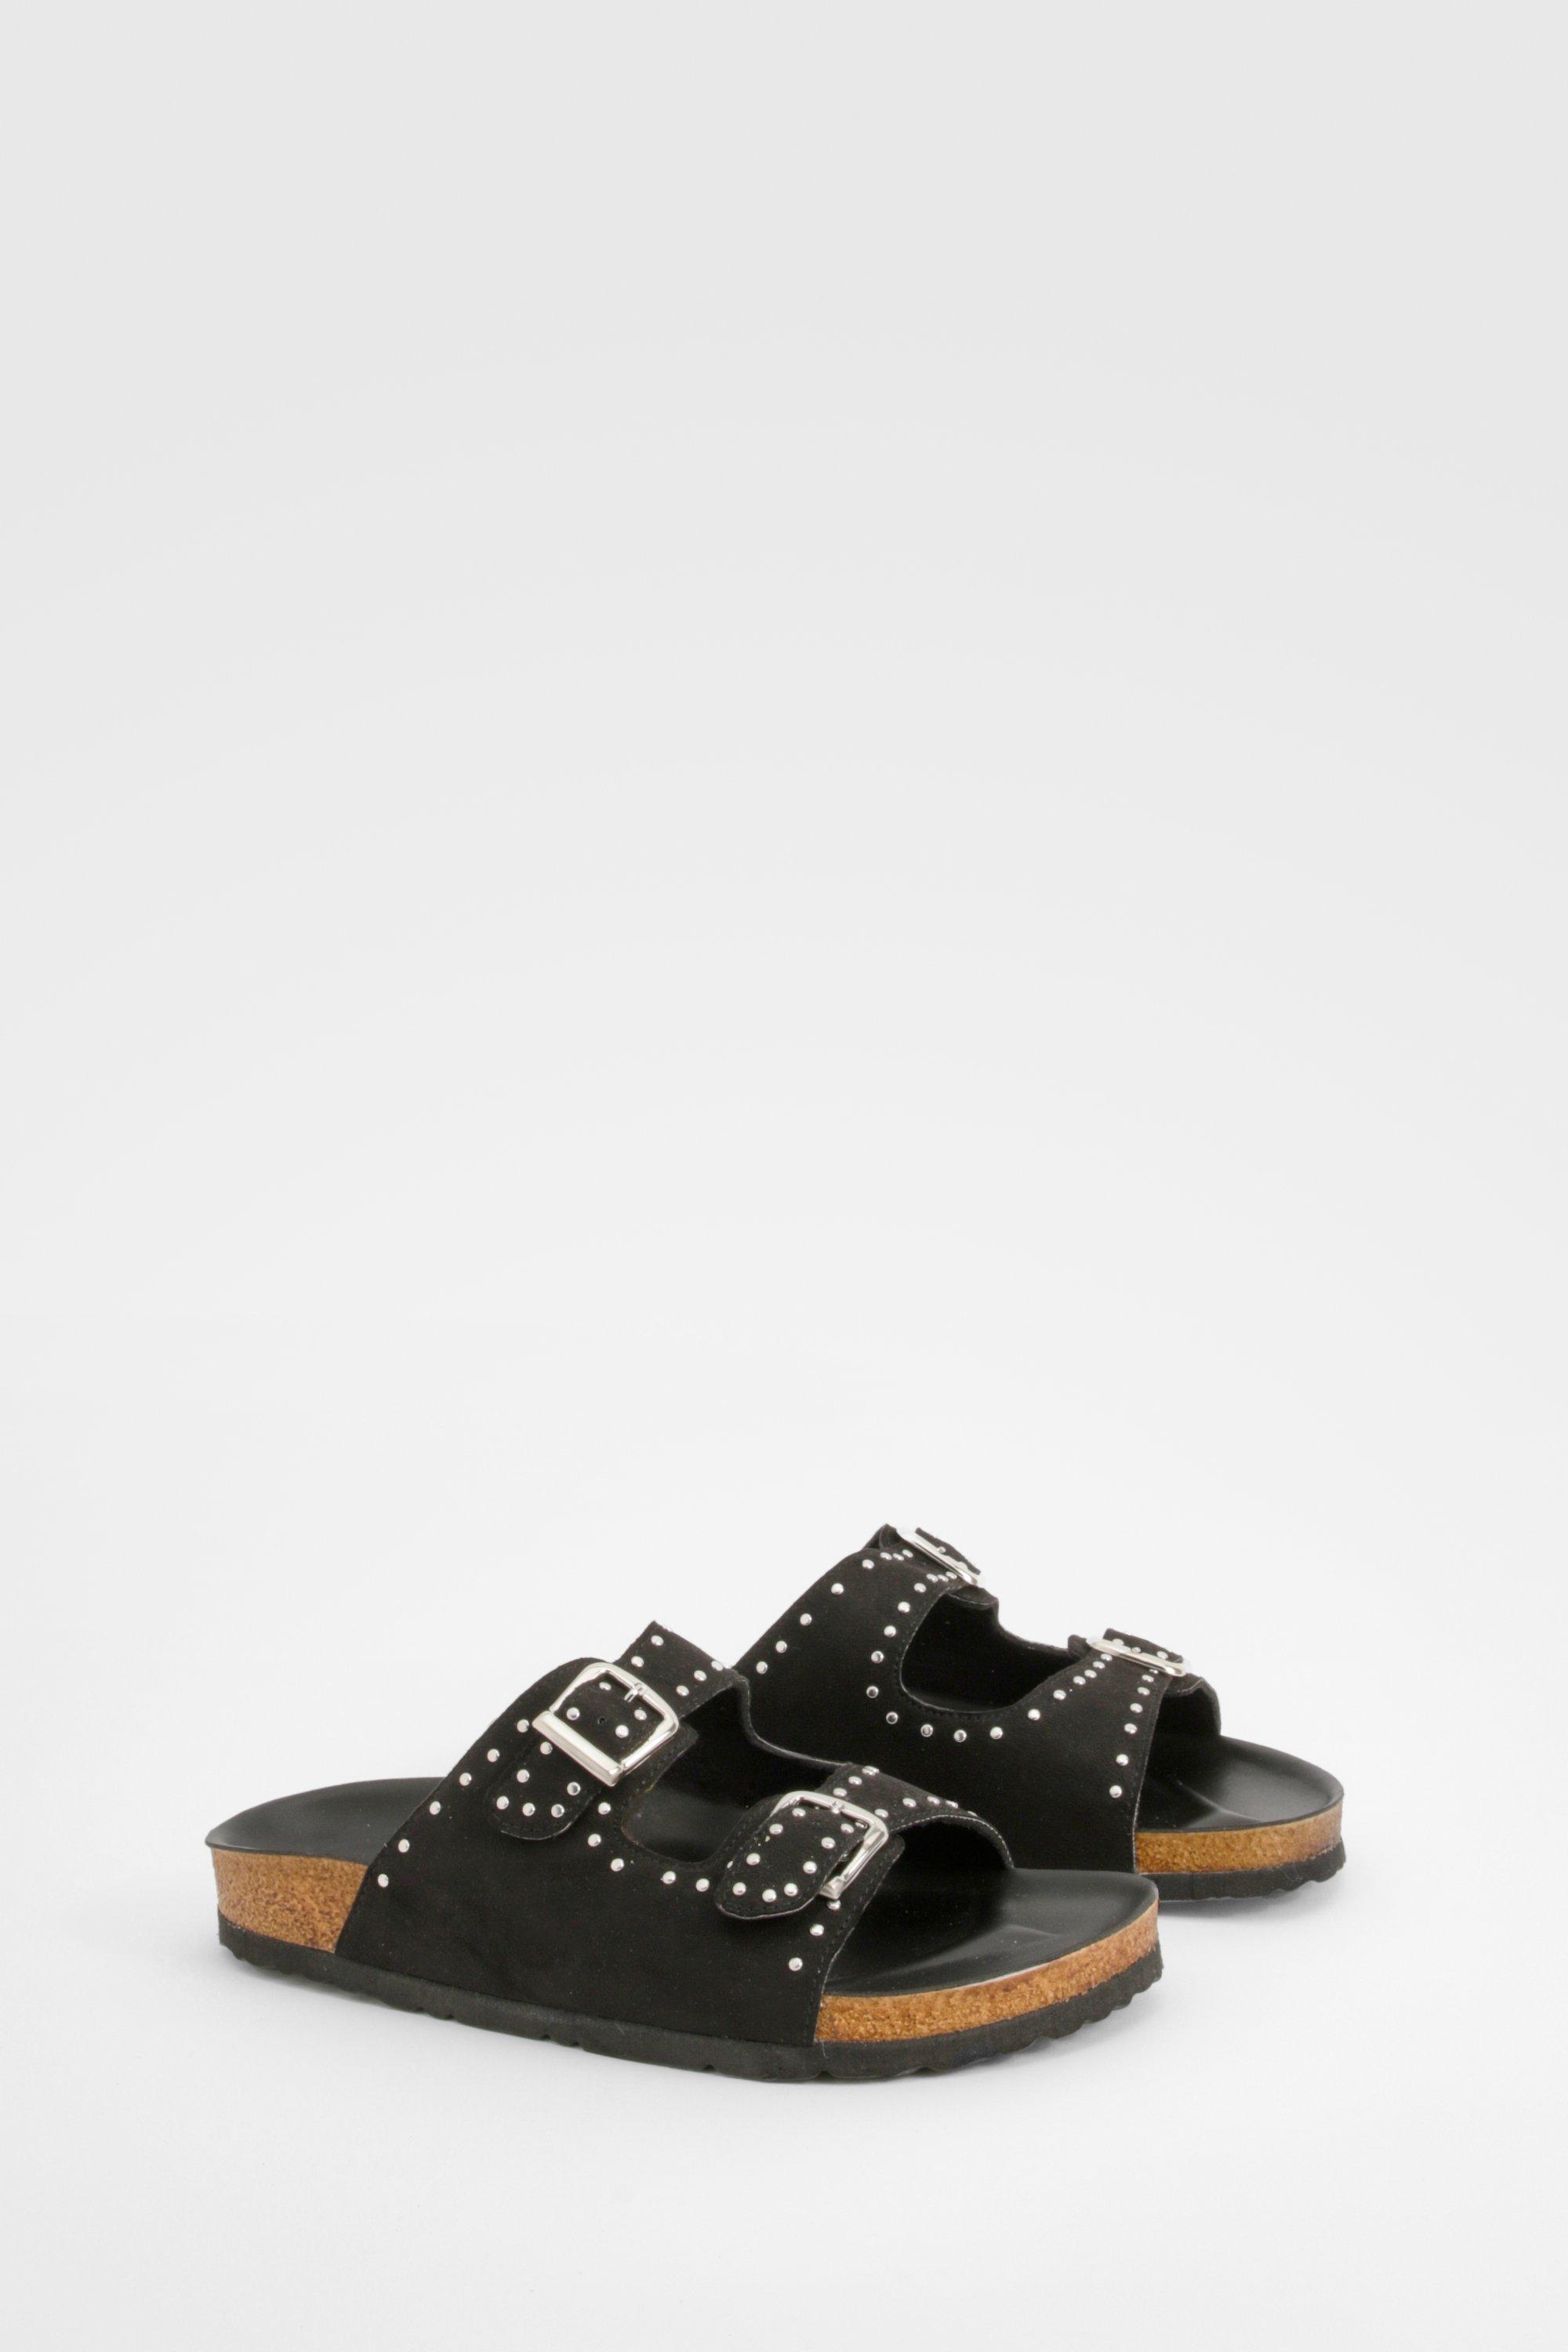 Image of Wide Fit Studded Double Buckle Footbed Sliders, Nero